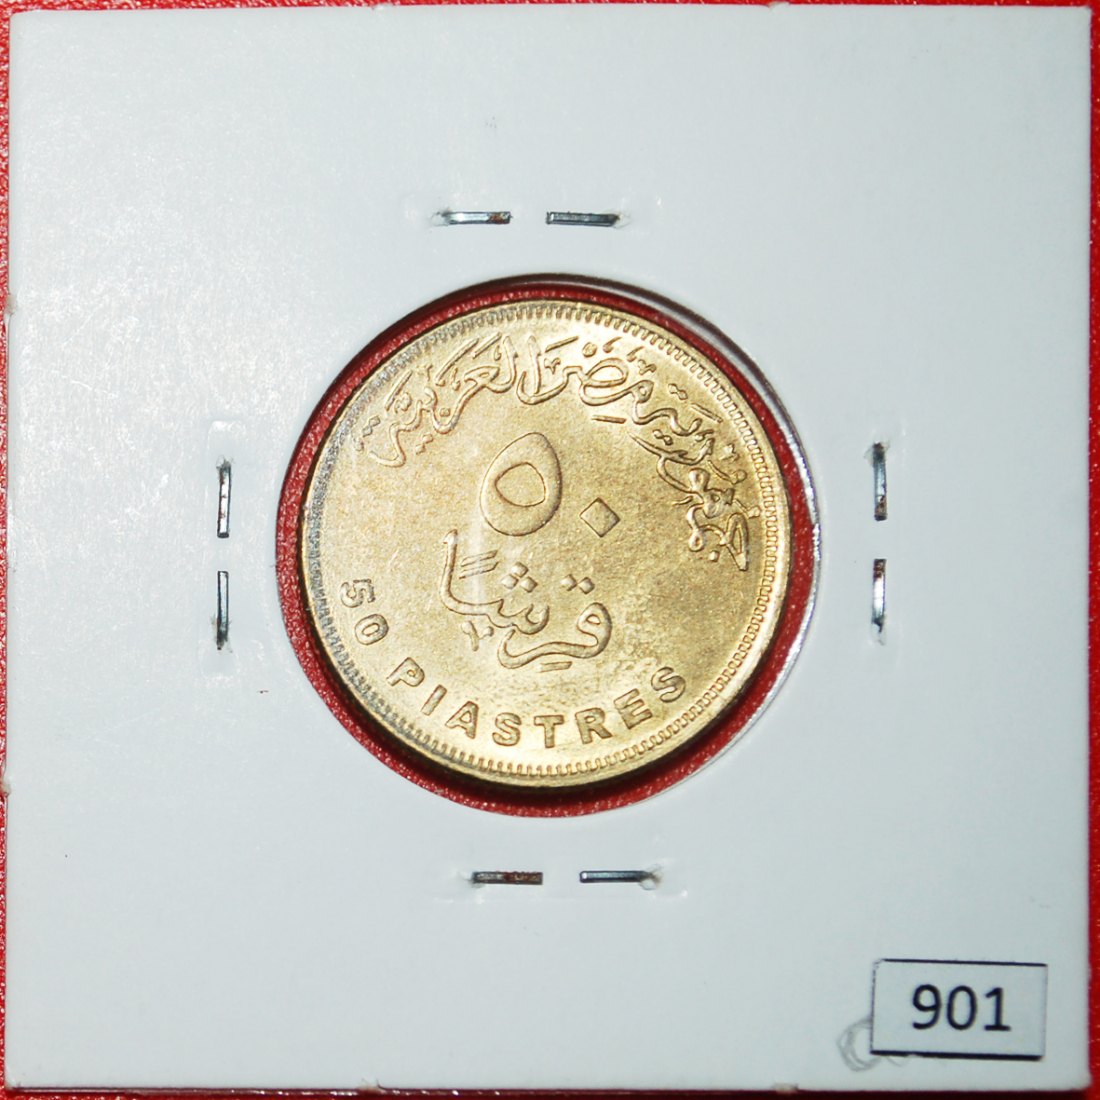  * ROADS DIE 1 : EGYPT ★ 50 PIASTRES 1440-2019 UNC MINT LUSTRE! IN HOLDER!★LOW START ★ NO RESERVE!   